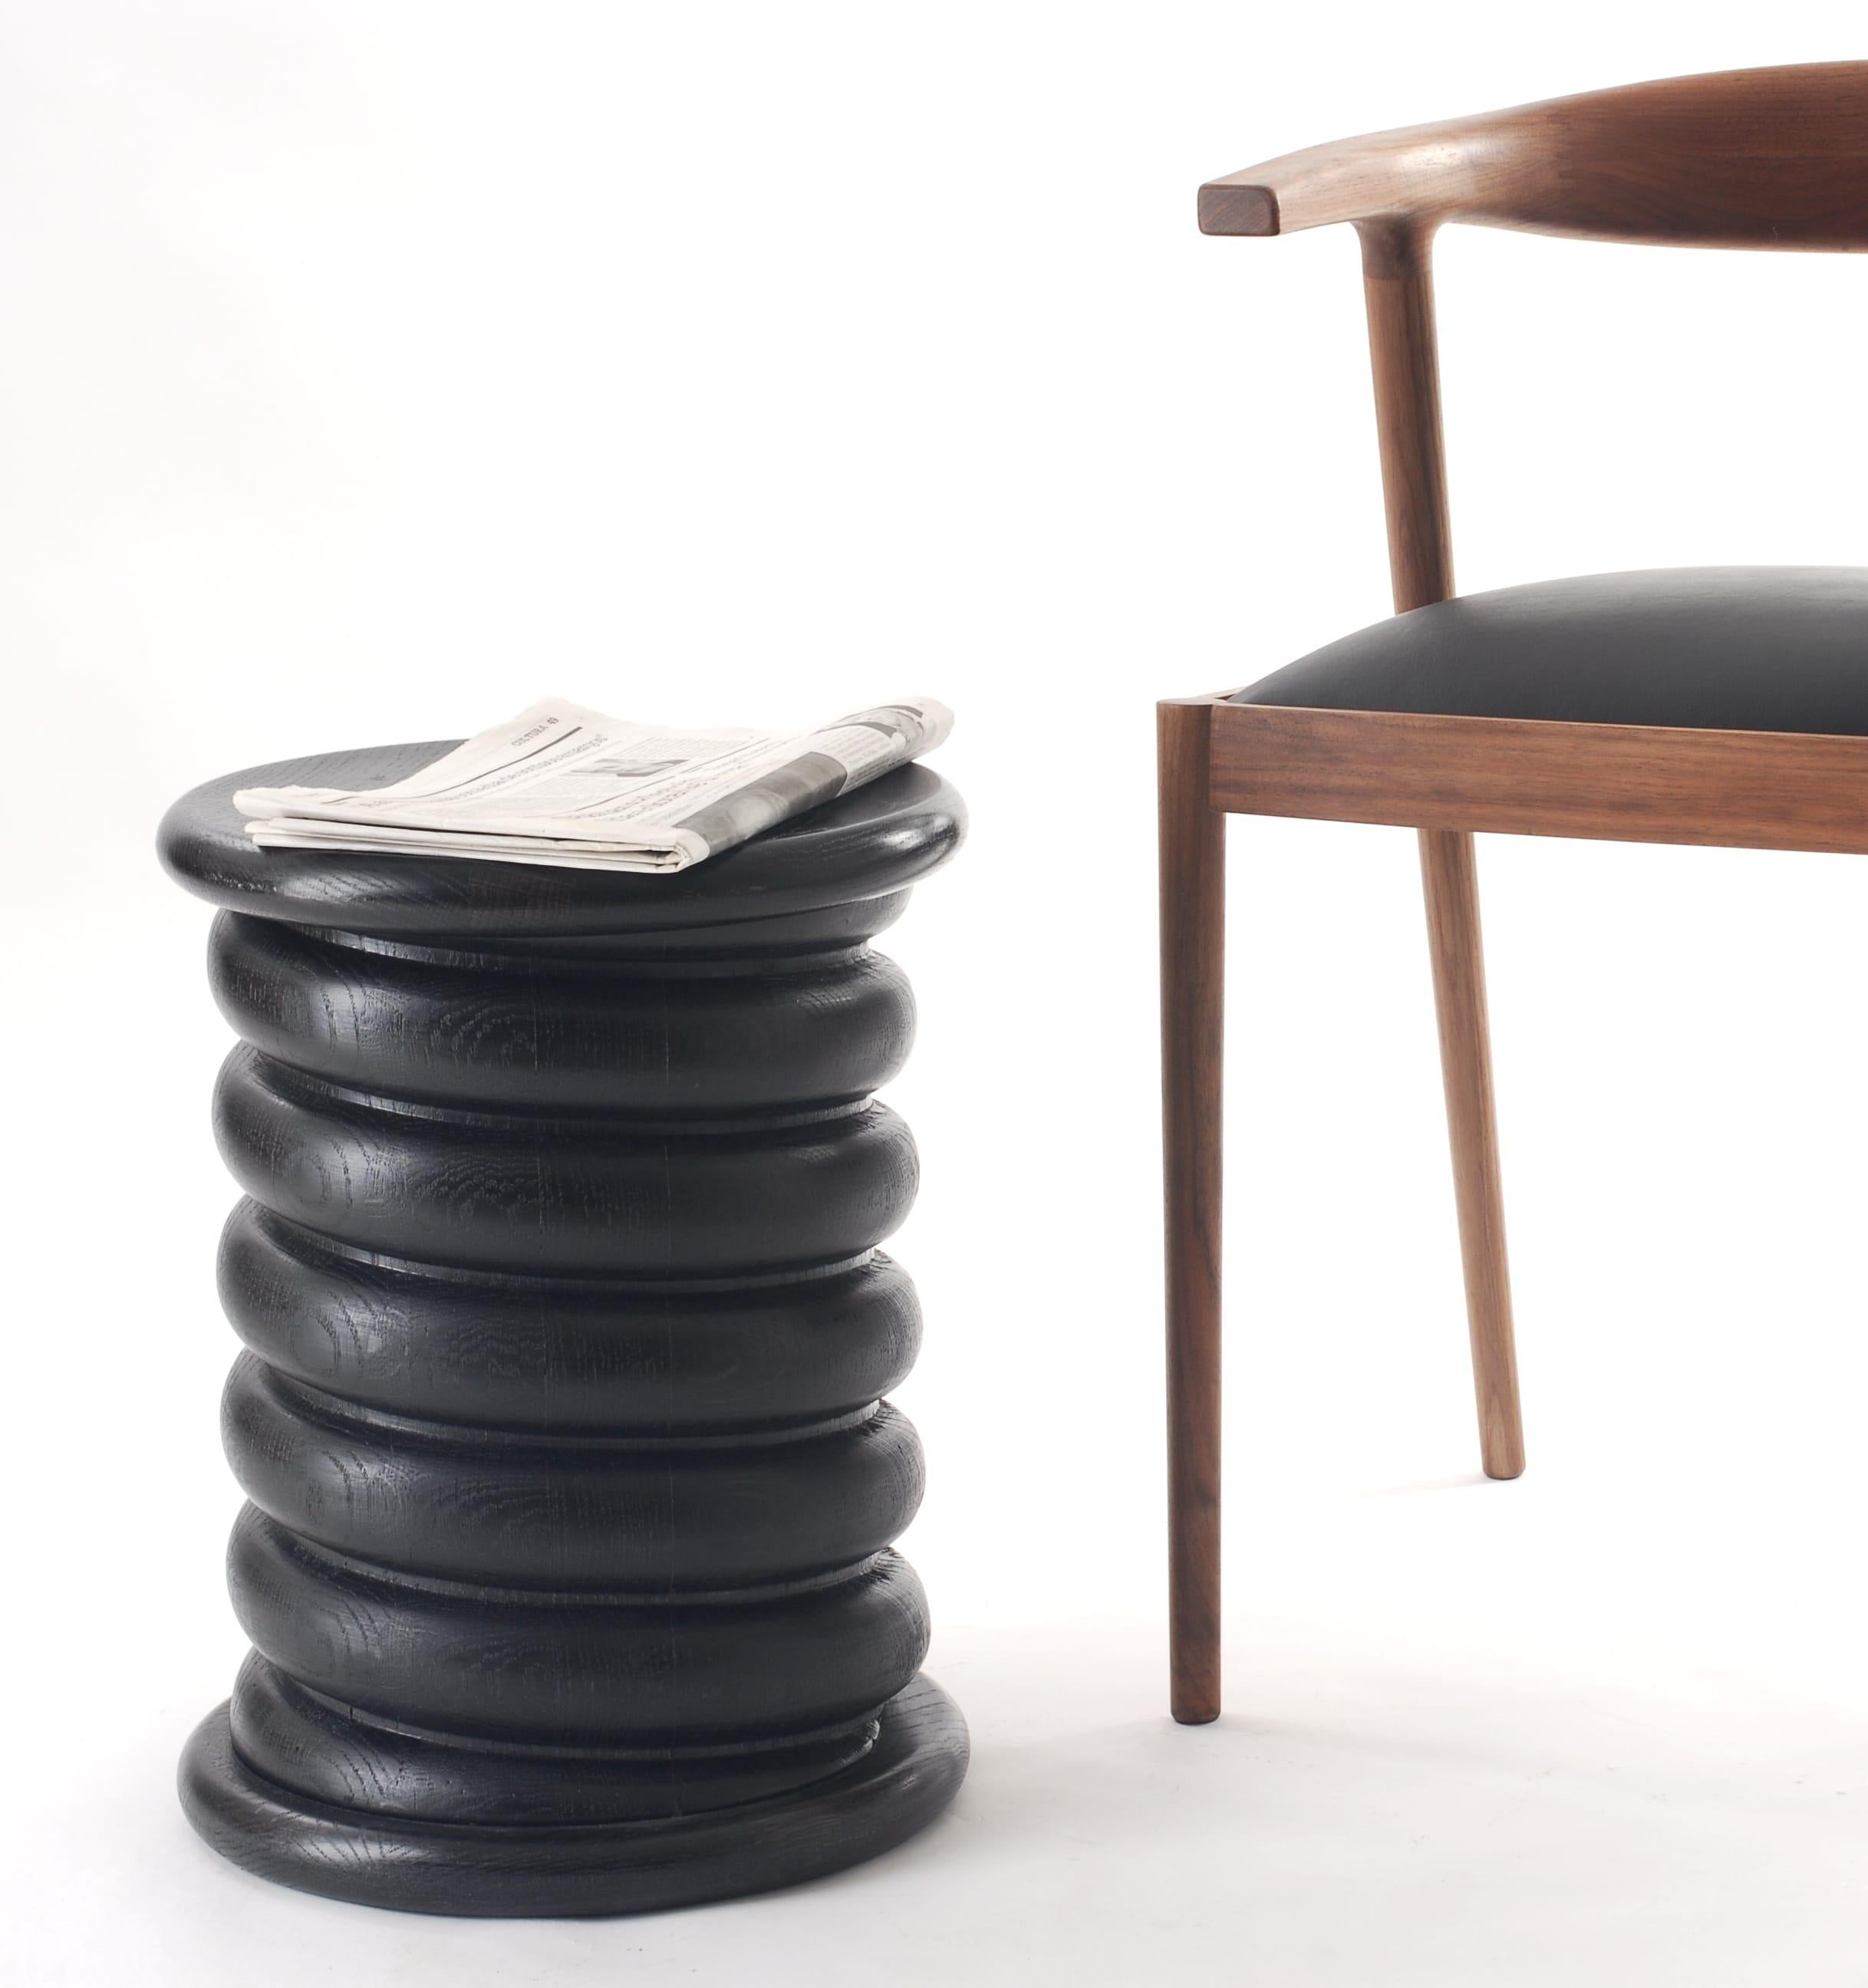 The soft curves of Tiffany stool and its versatility make this piece even more appealing. This modern stool with unique characteristics possesses smooth curves for a more modern and sculptural appeal. It can be a functional piece table for lateral